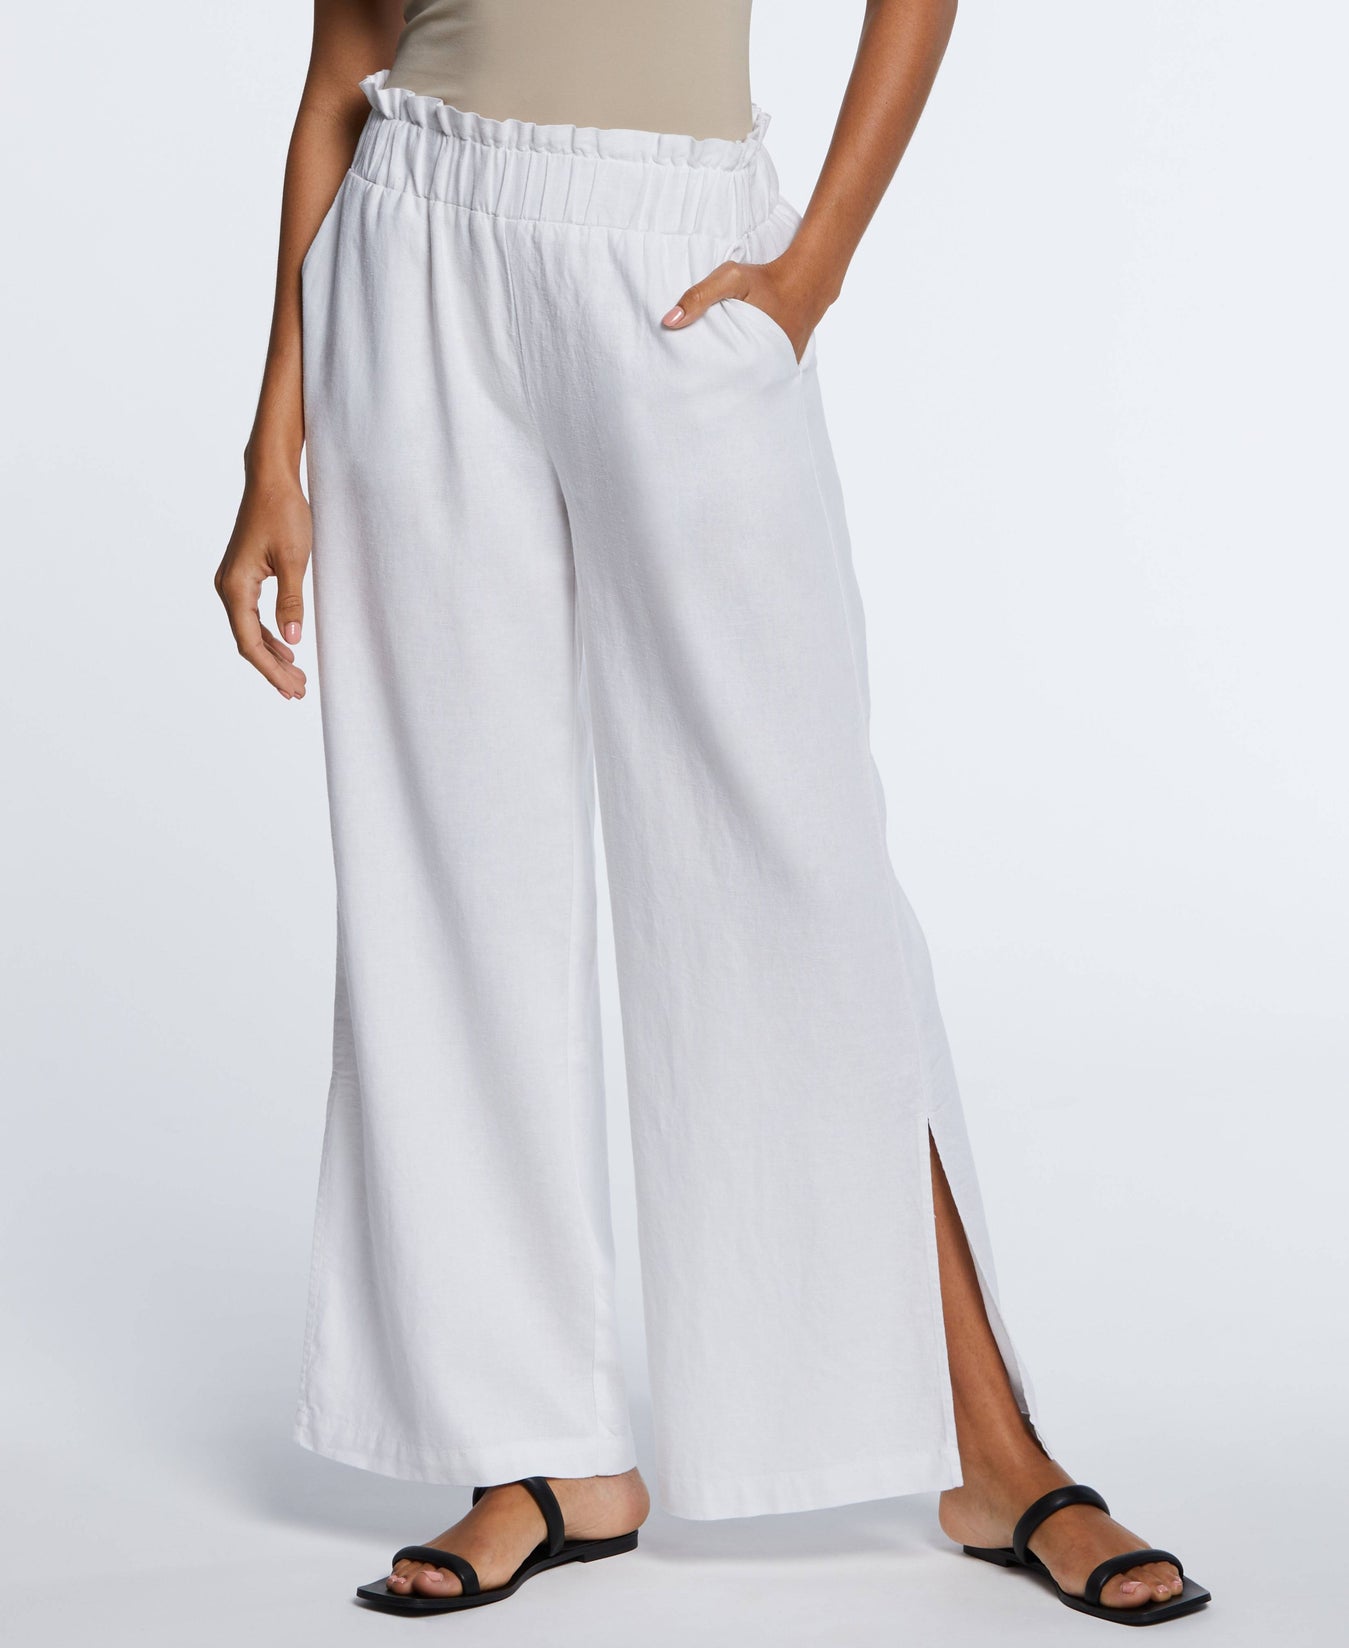 Pull On Wide Leg Pants - Plus Size